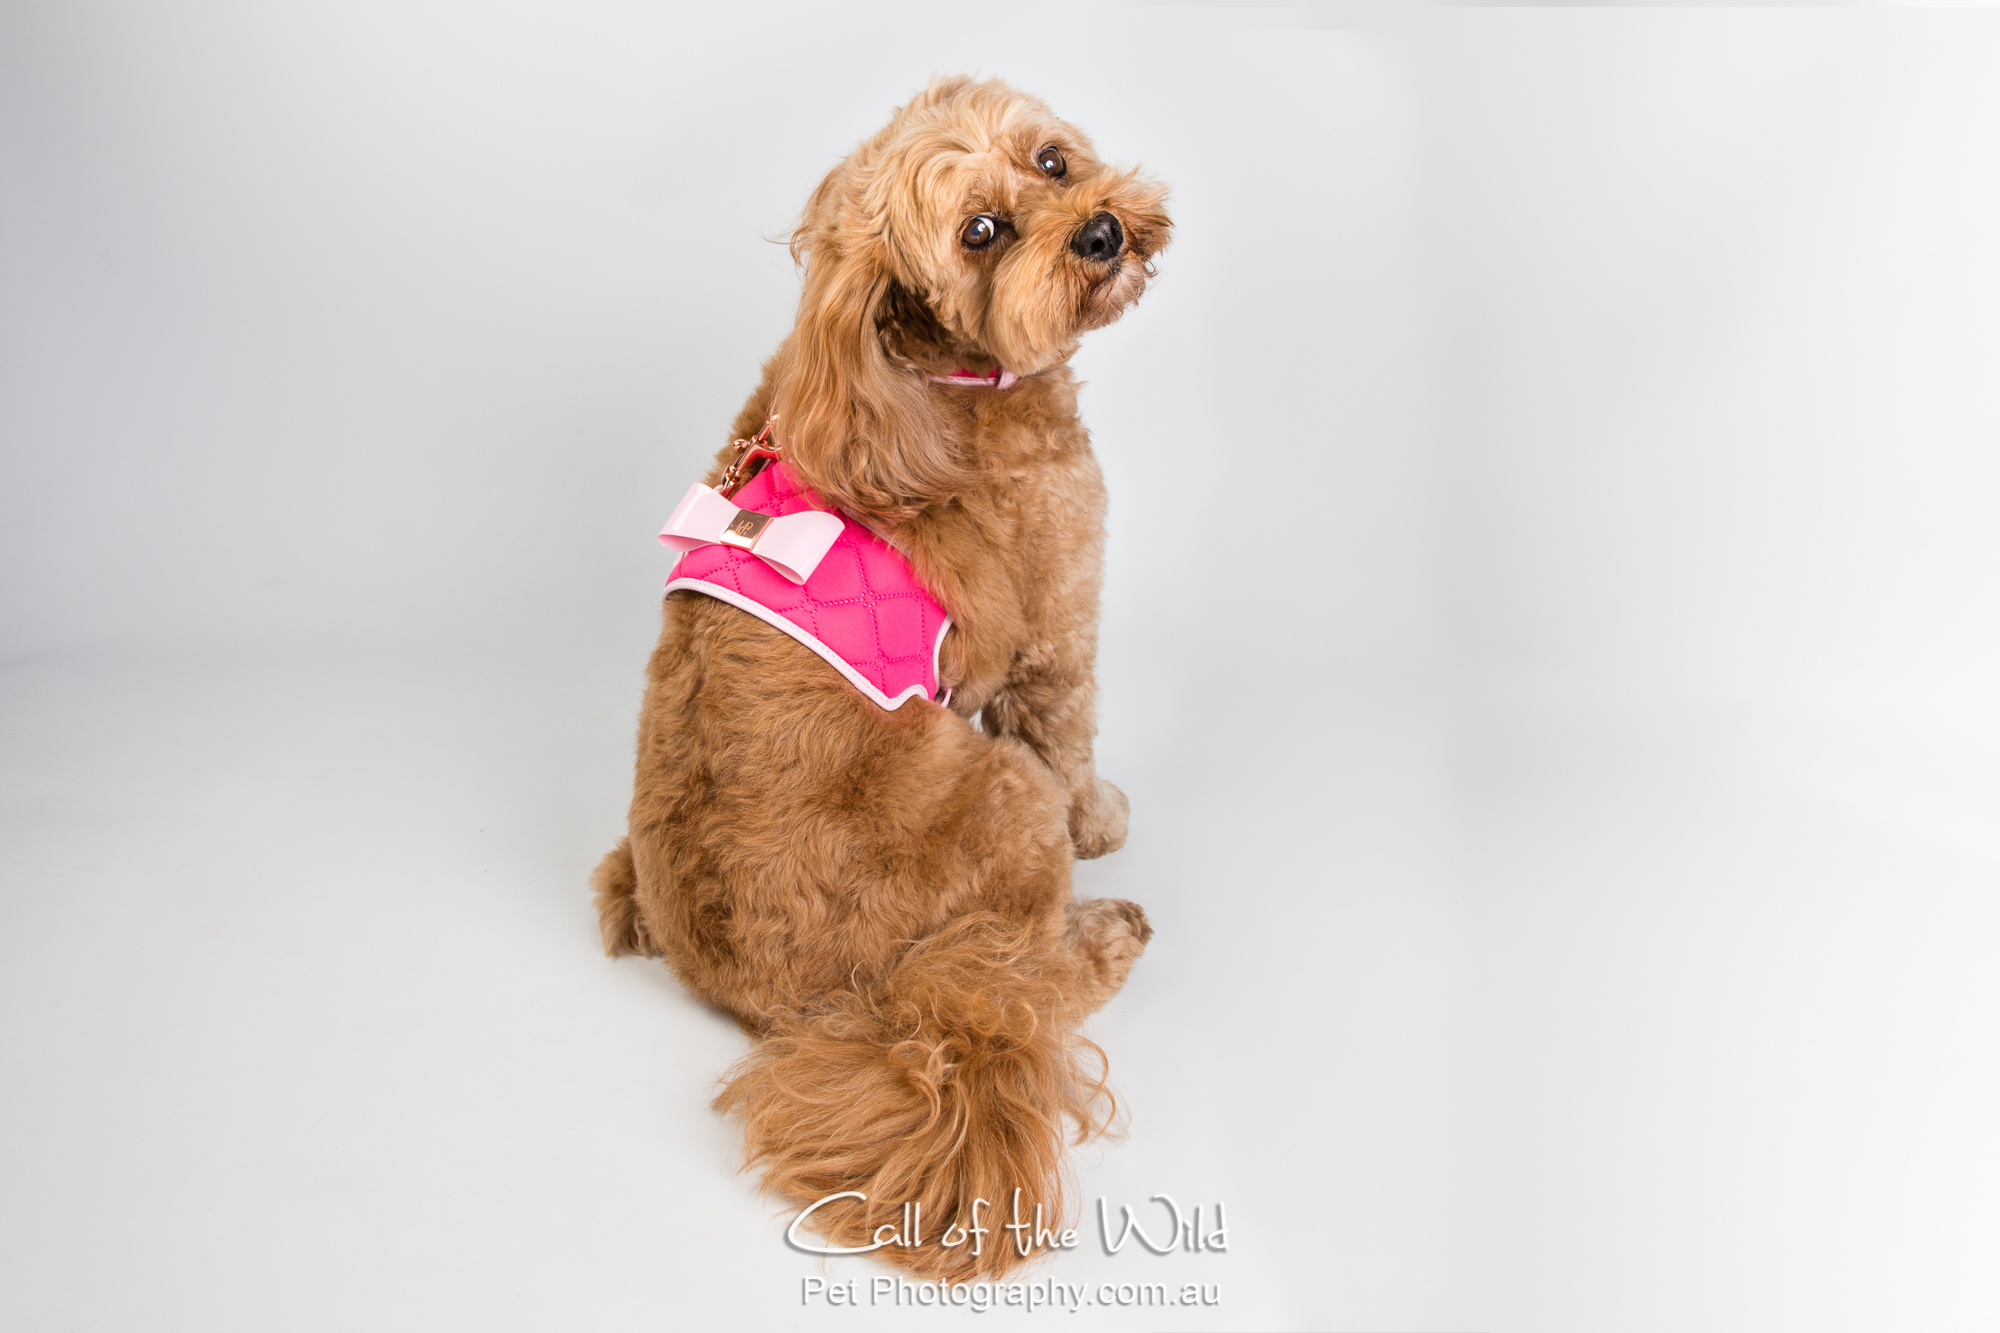  Product Photography for dogs